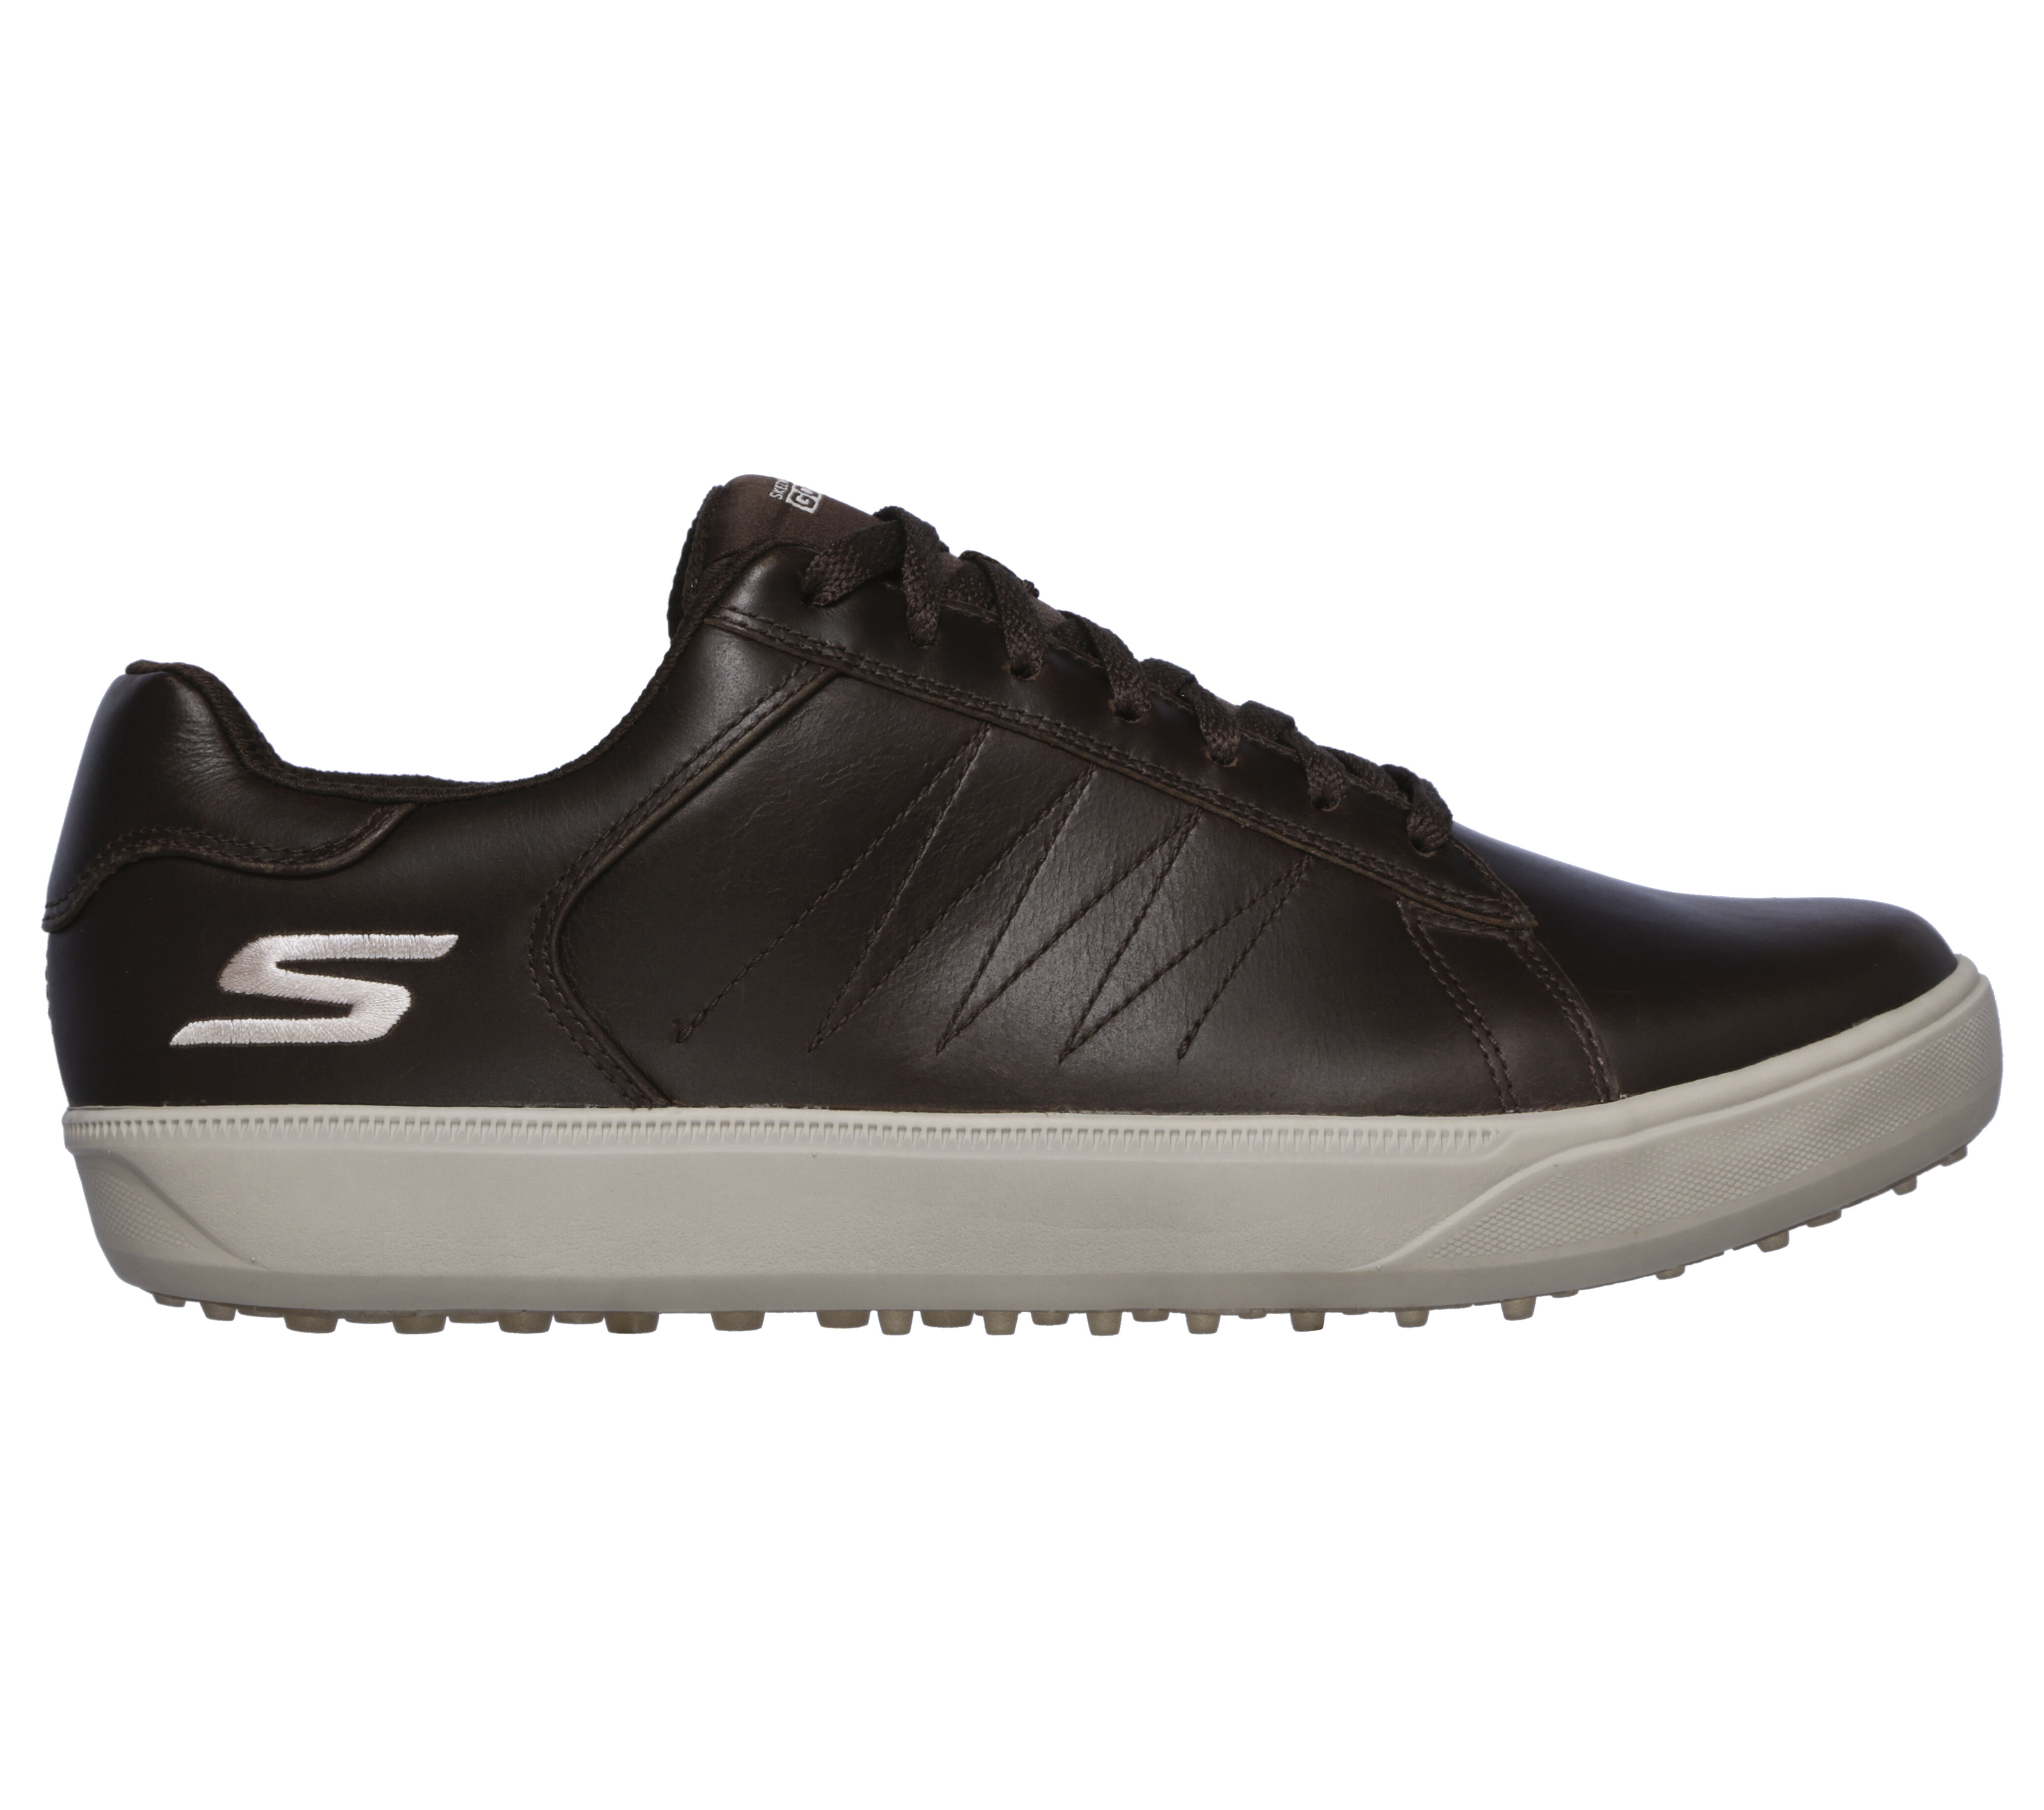 skechers on the go brown